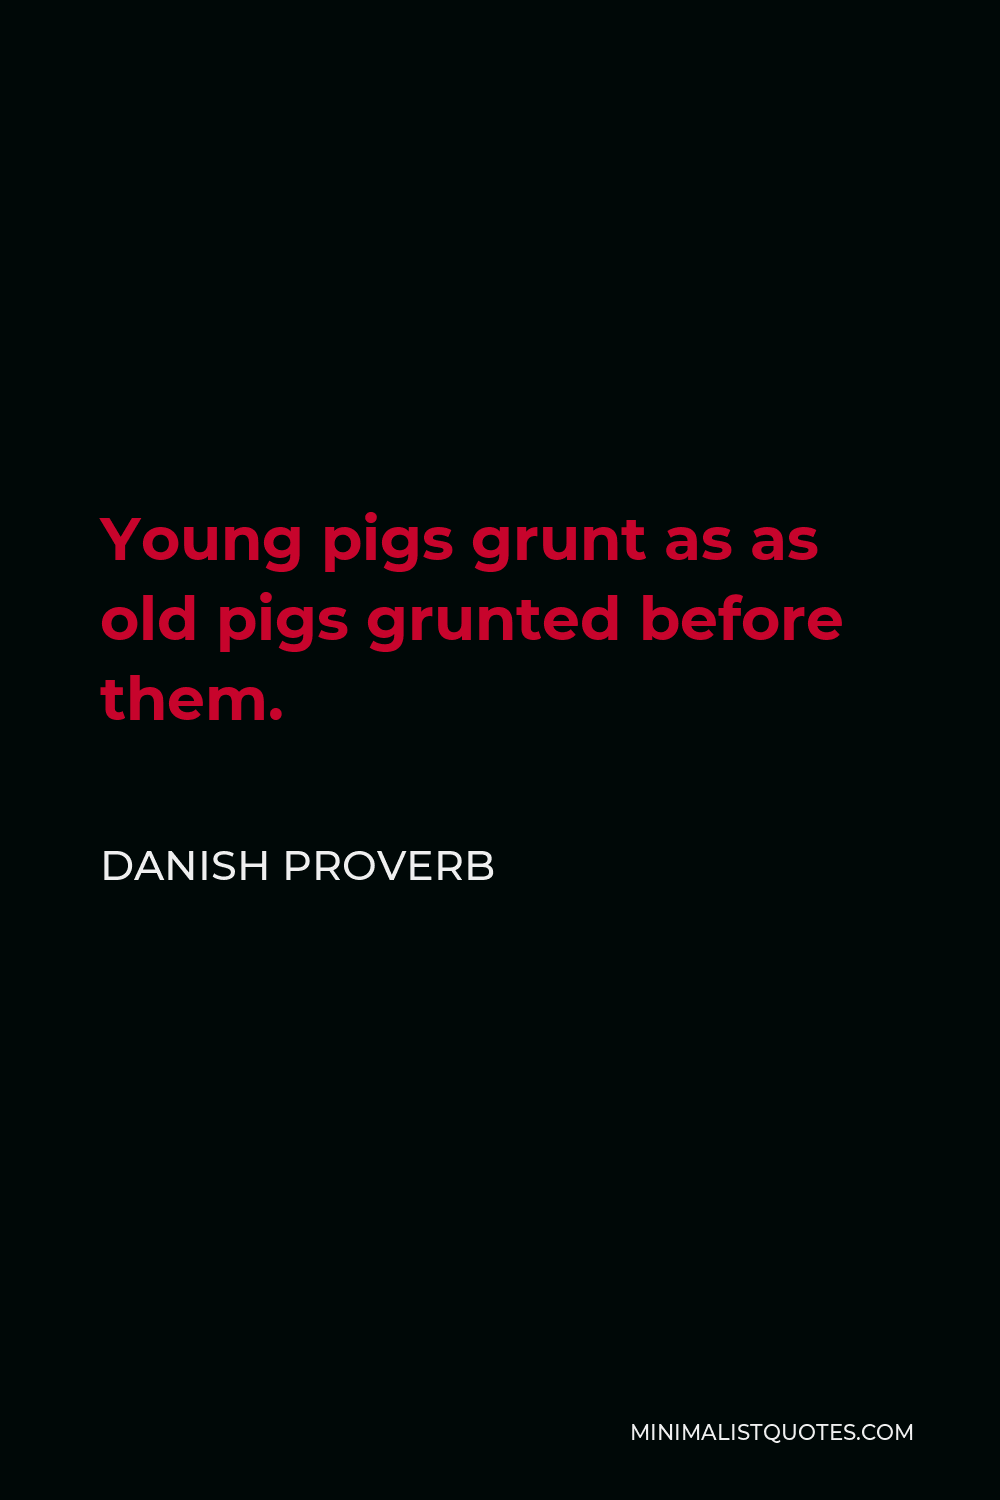 Danish Proverb Quote - Young pigs grunt as as old pigs grunted before them.